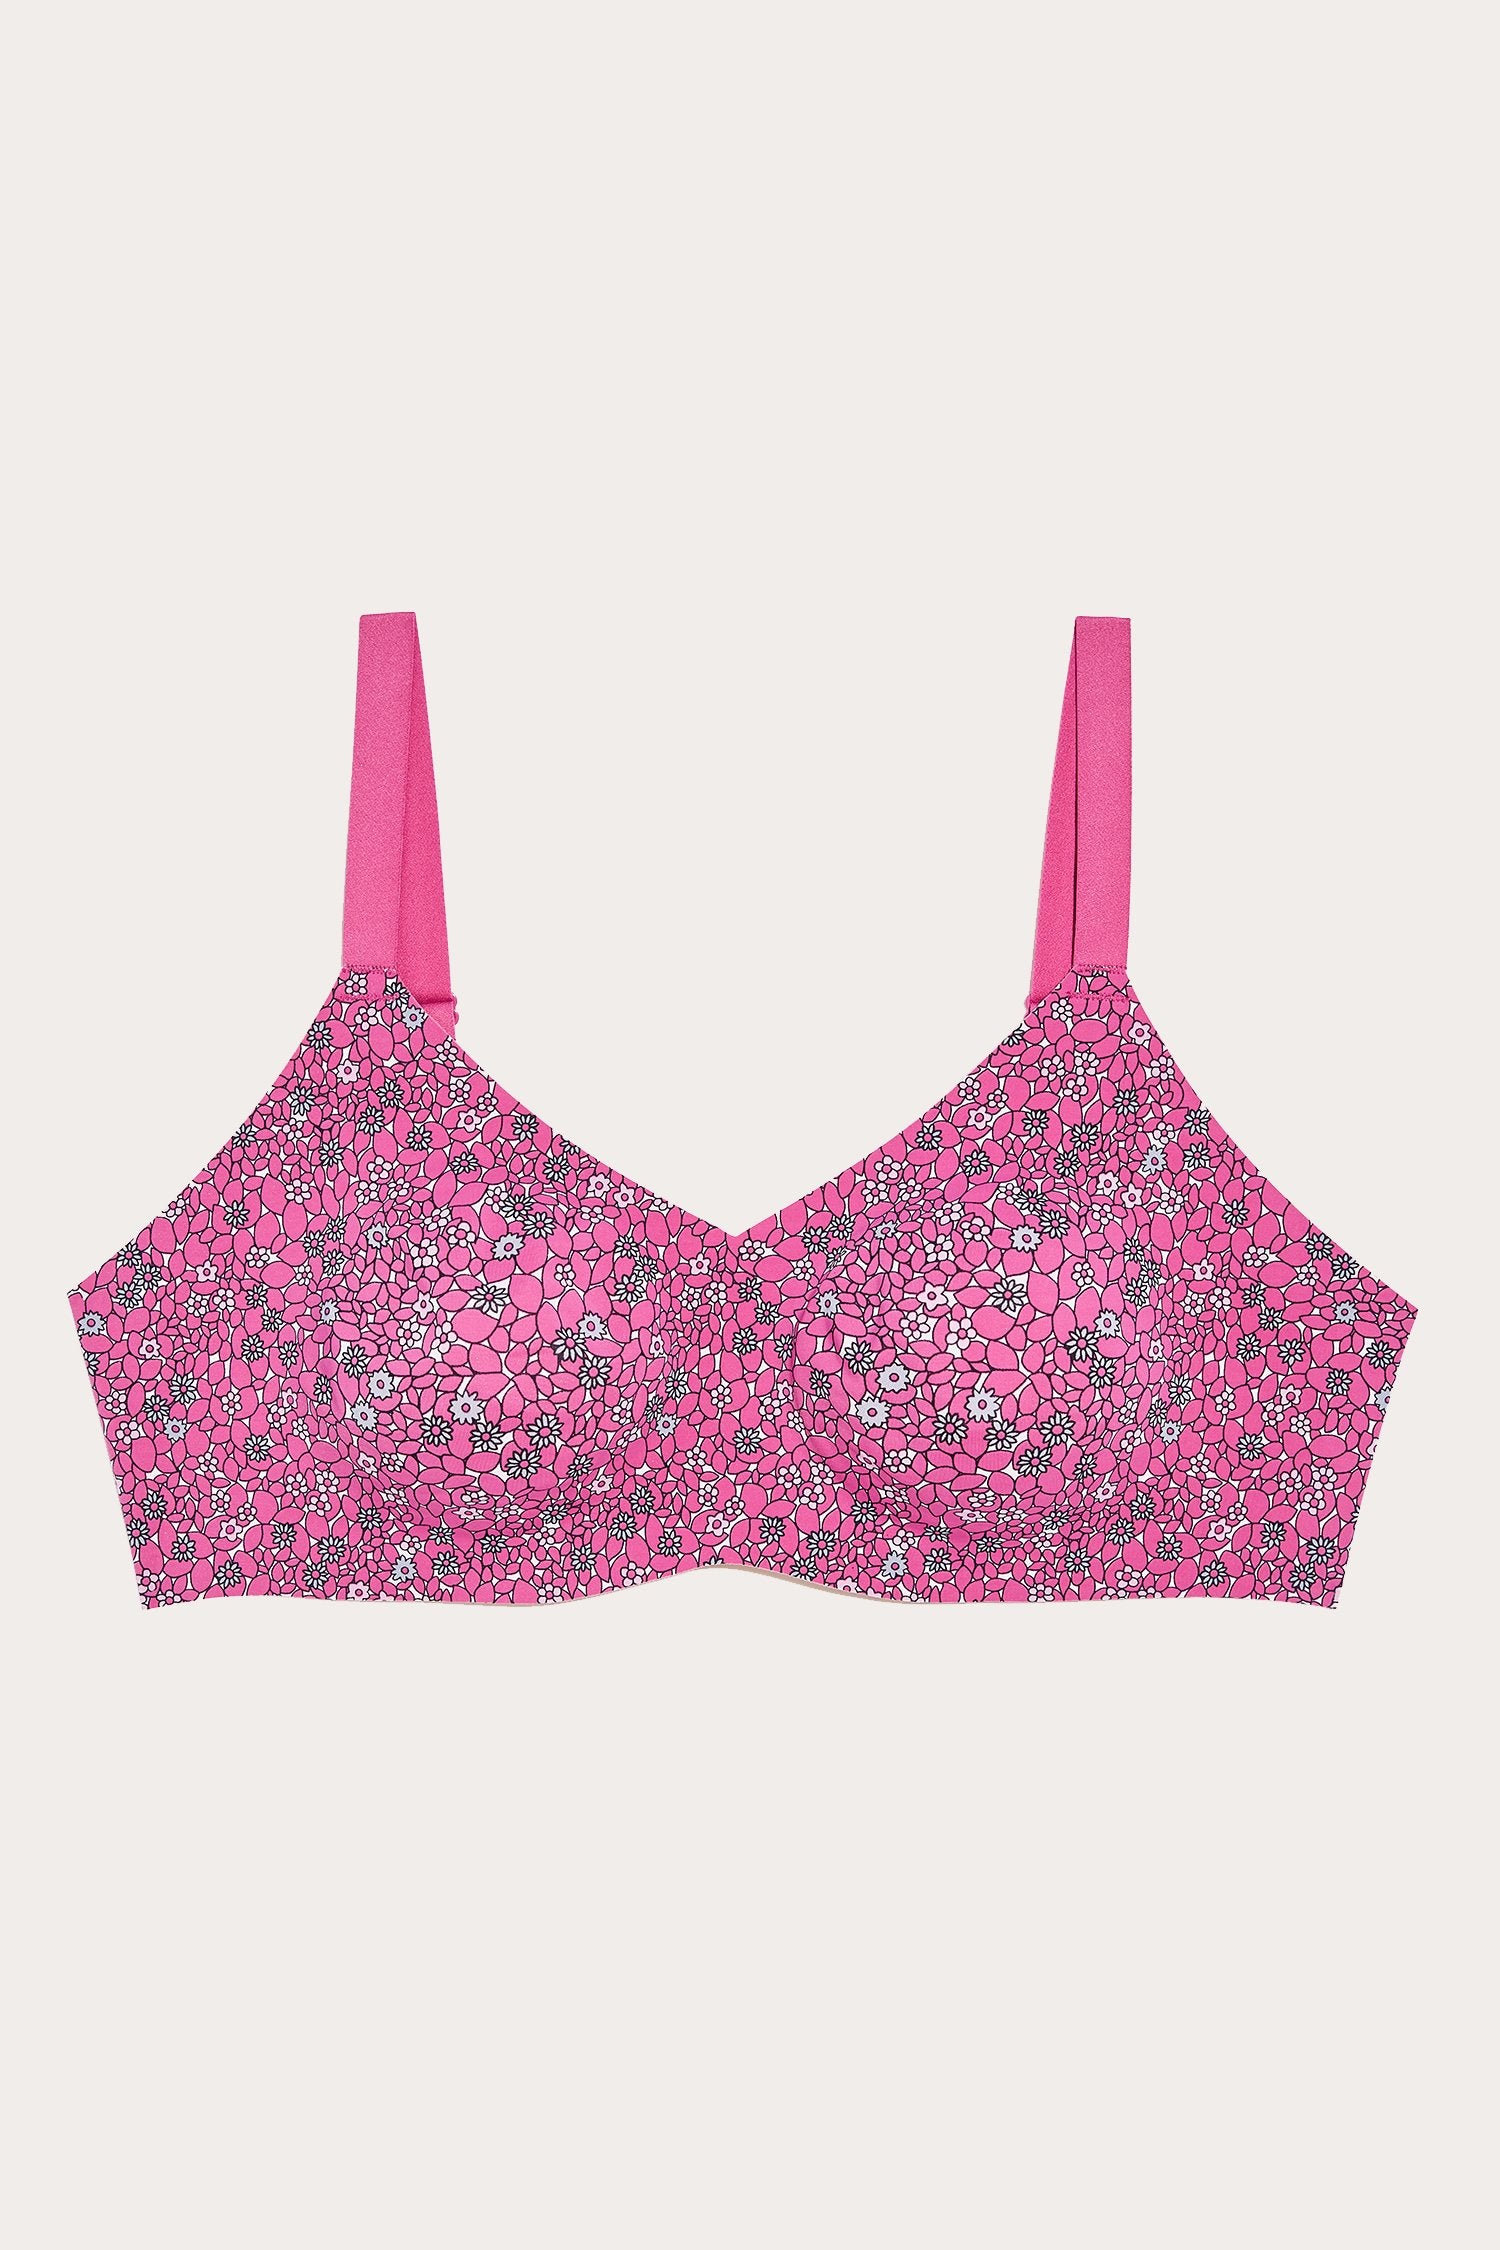 Anna Sui x Knix Posey Hedge Luxe V-Neck Padded Bra